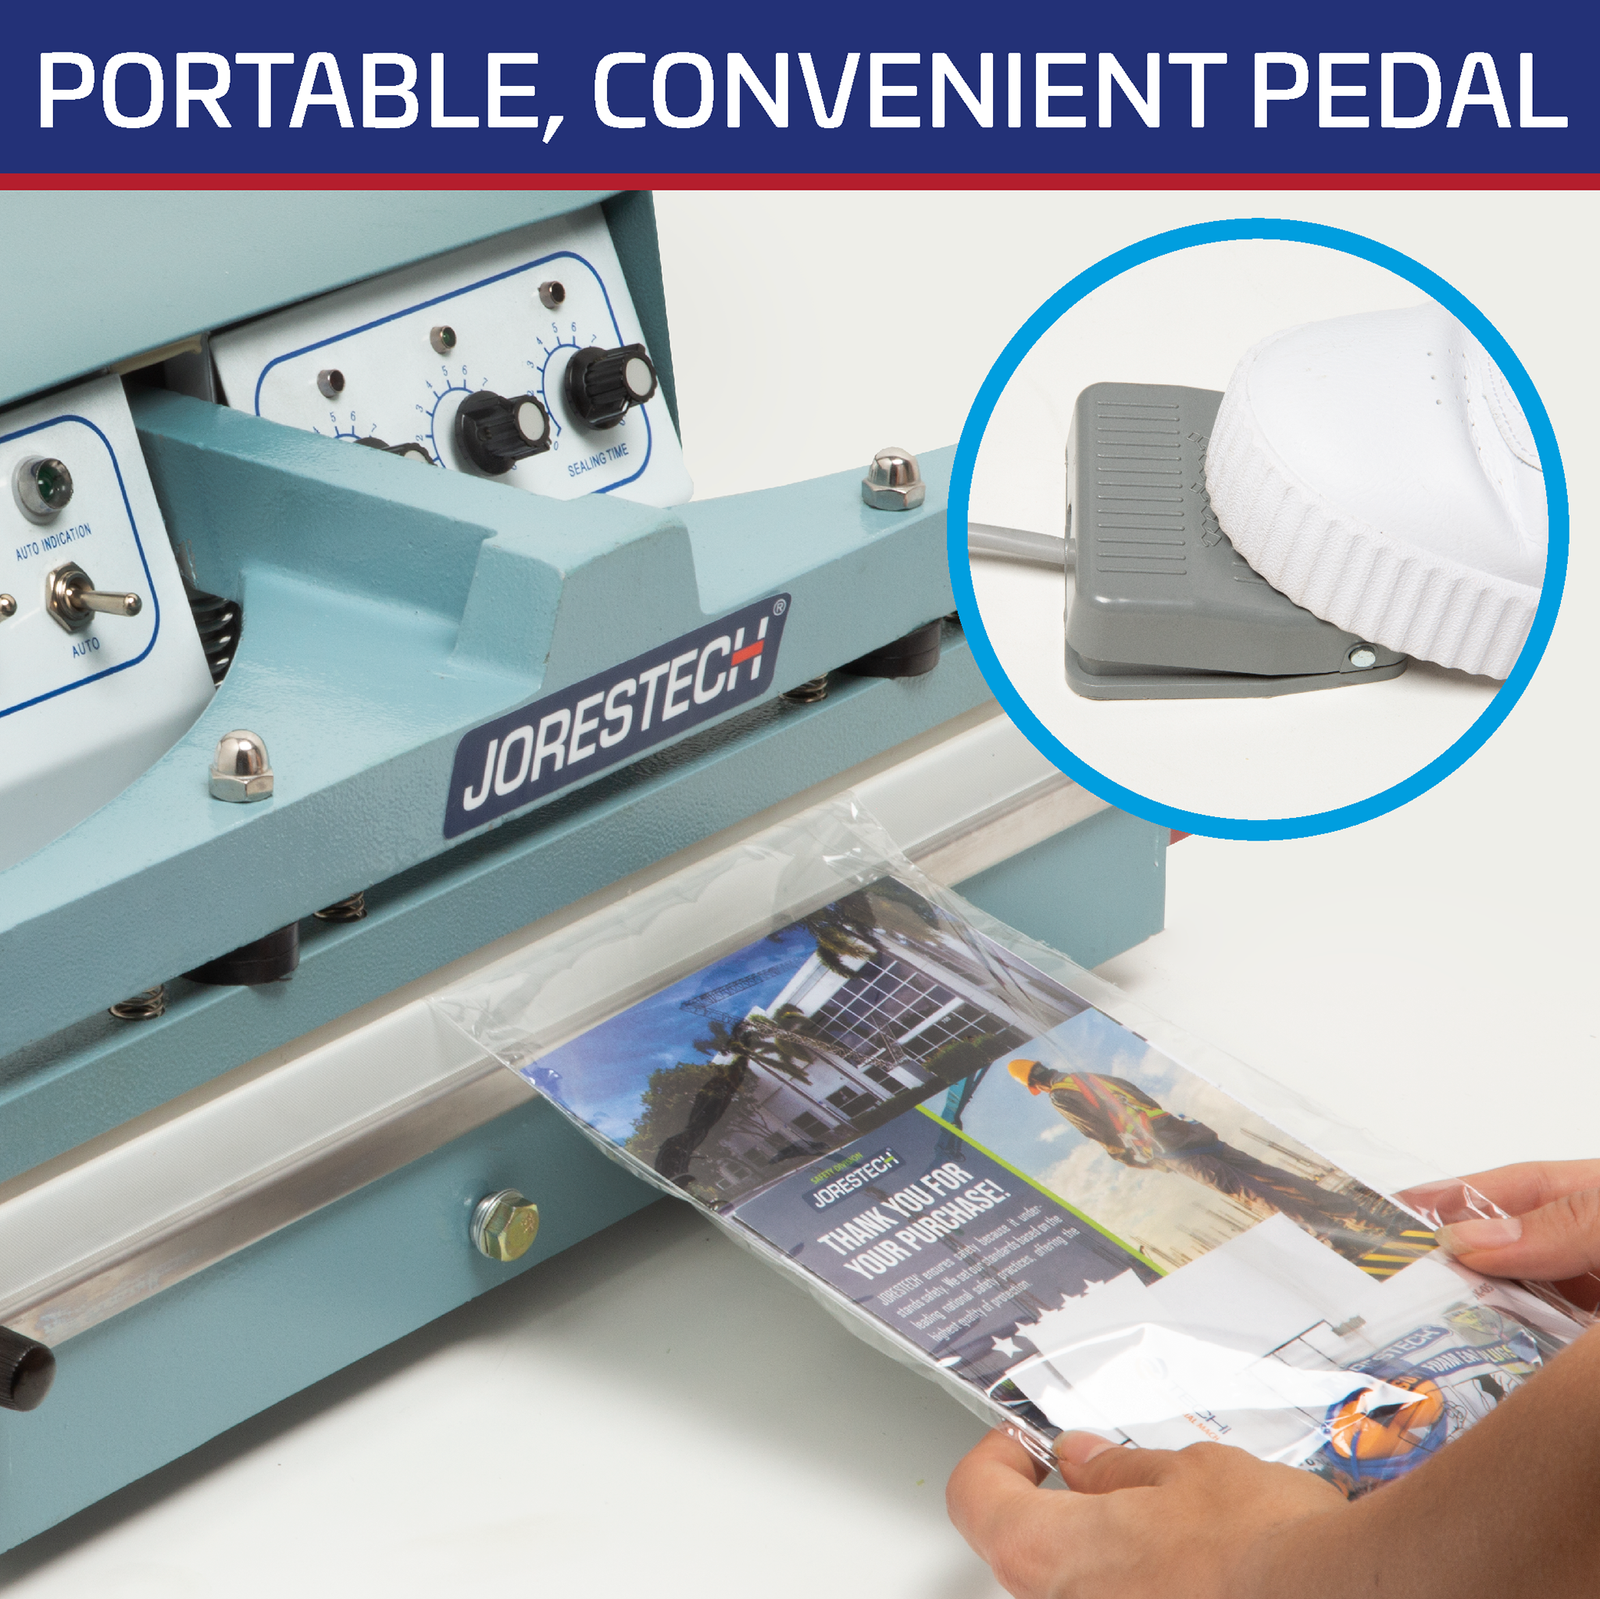 Titled reads: “Portable, Convenient Pedal” shows a promotional bundle being sealed inside a plastic bag with the jorestech tabletop foot sealer. There is also a highlighted showing the pedal being pressed to seal the bag.